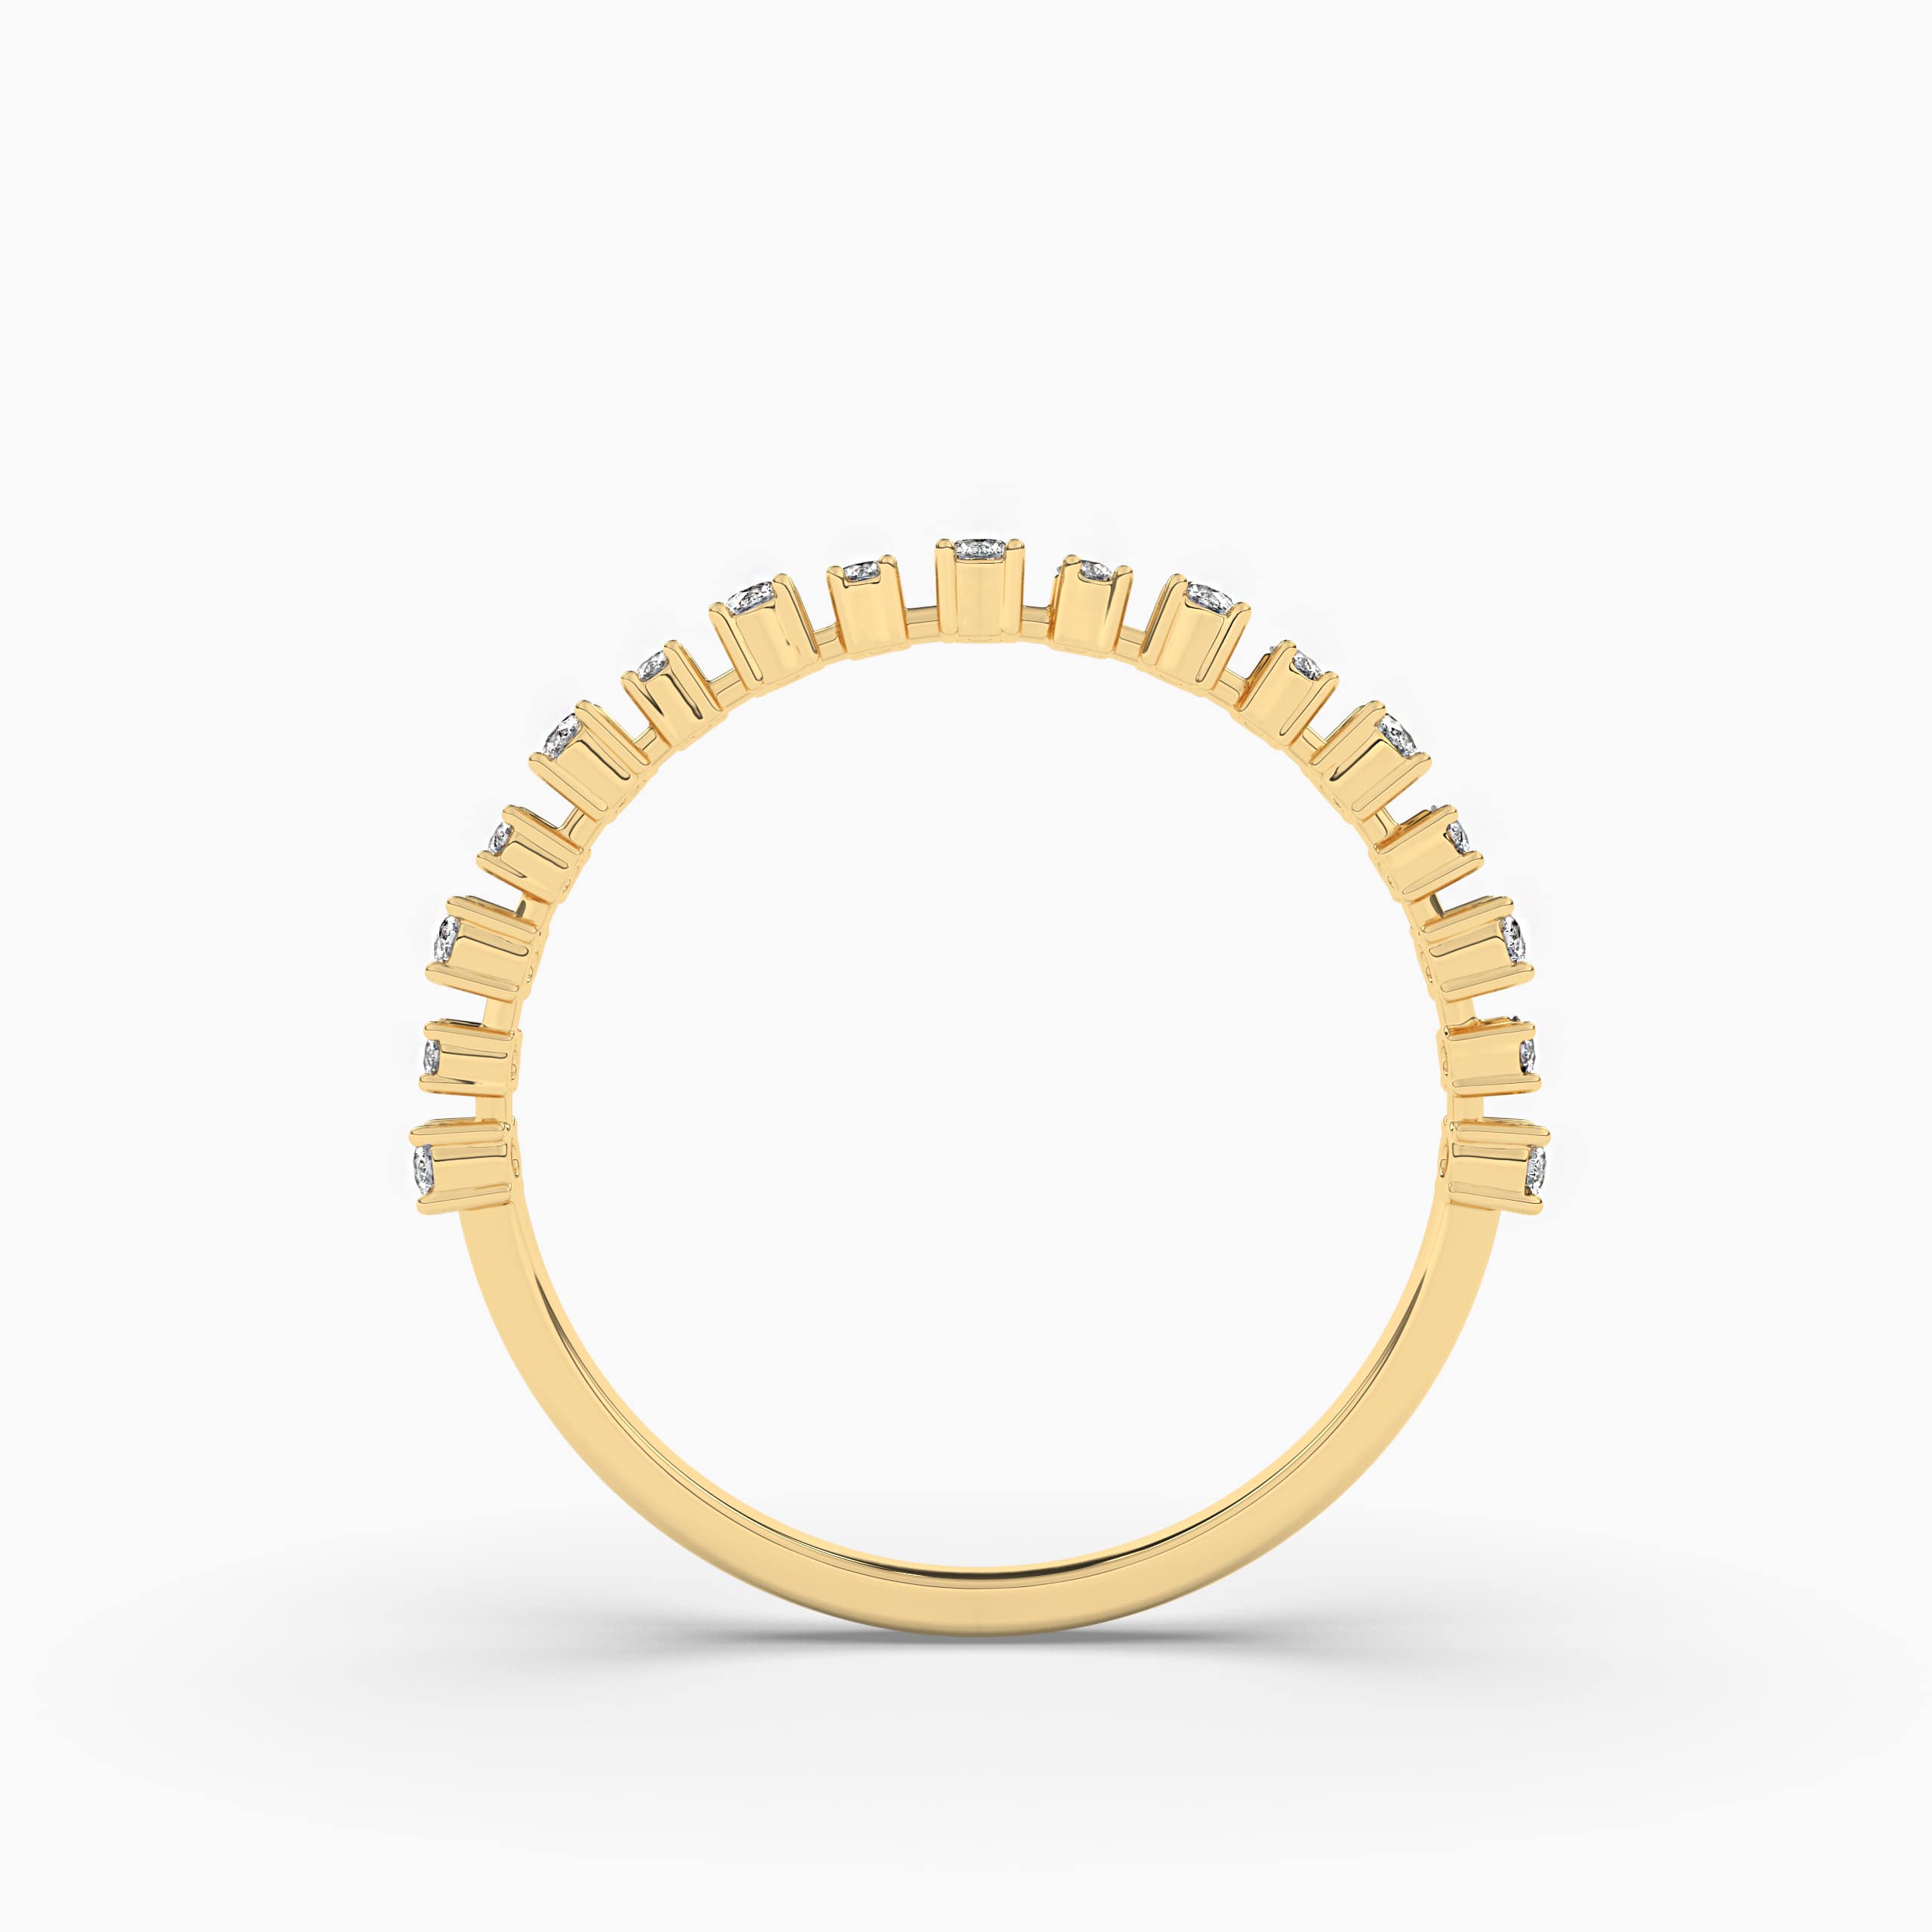 ETERNITY BAND IN YELLOW GOLD